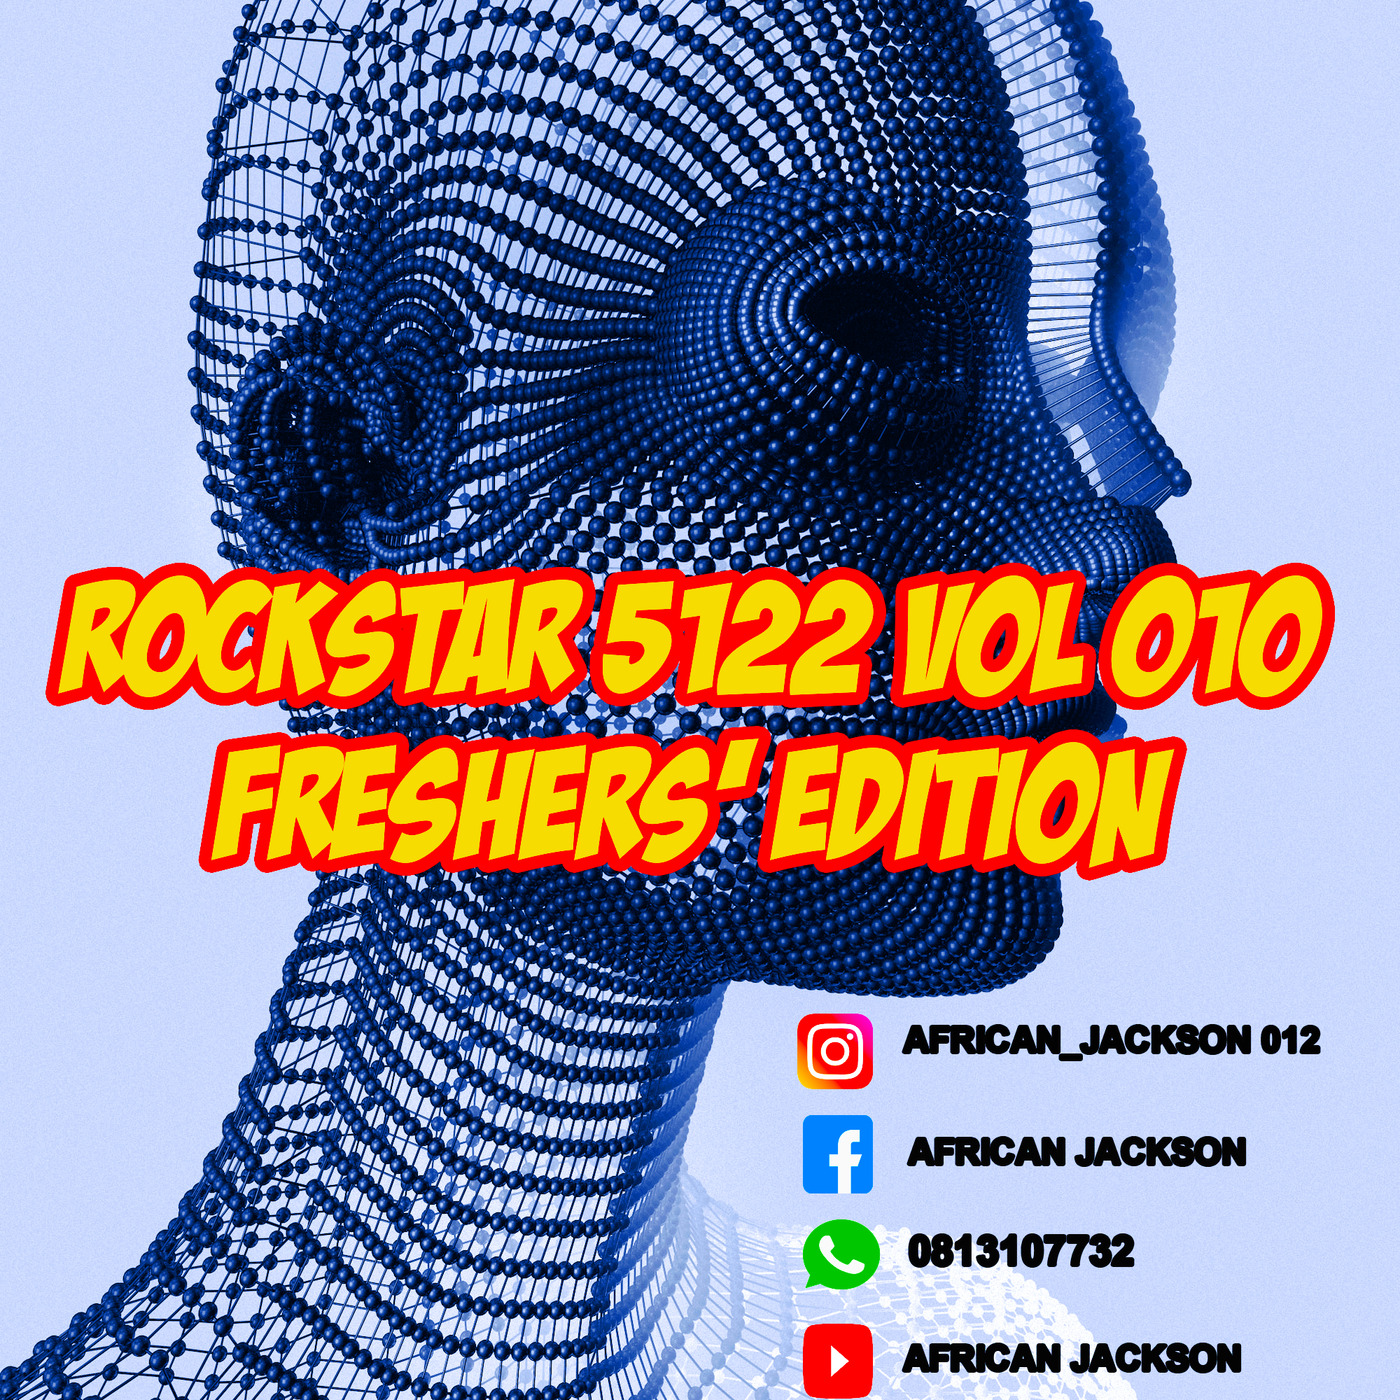 Rock_Star 5122 Vol 010 AMAPIANO MIX [Freshers Edition] By African Jackson